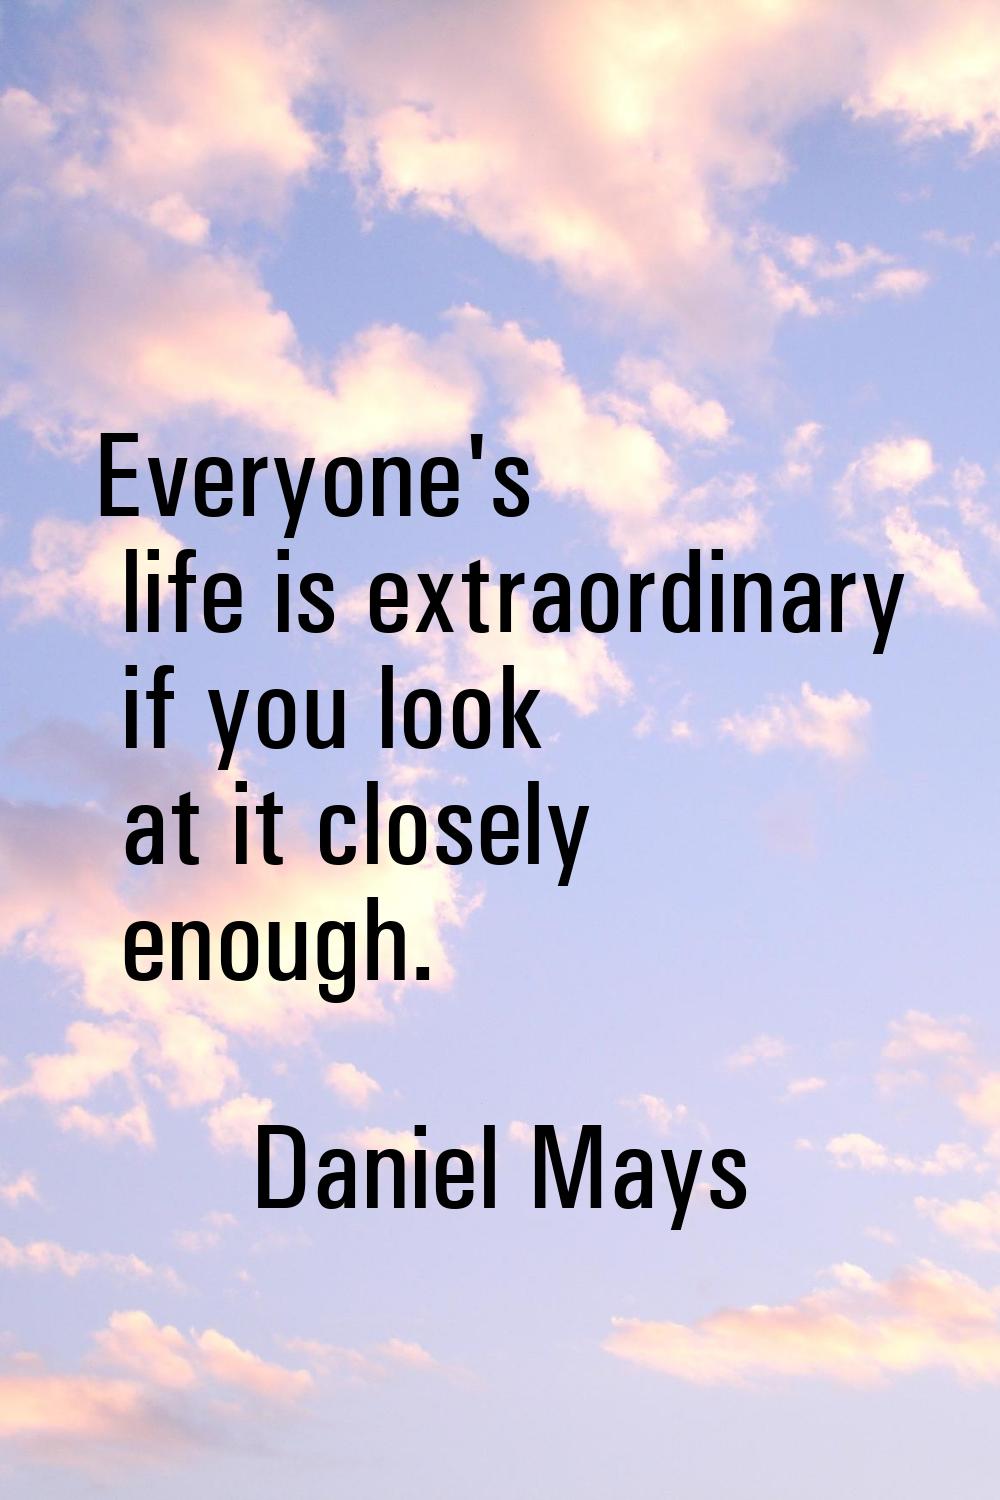 Everyone's life is extraordinary if you look at it closely enough.